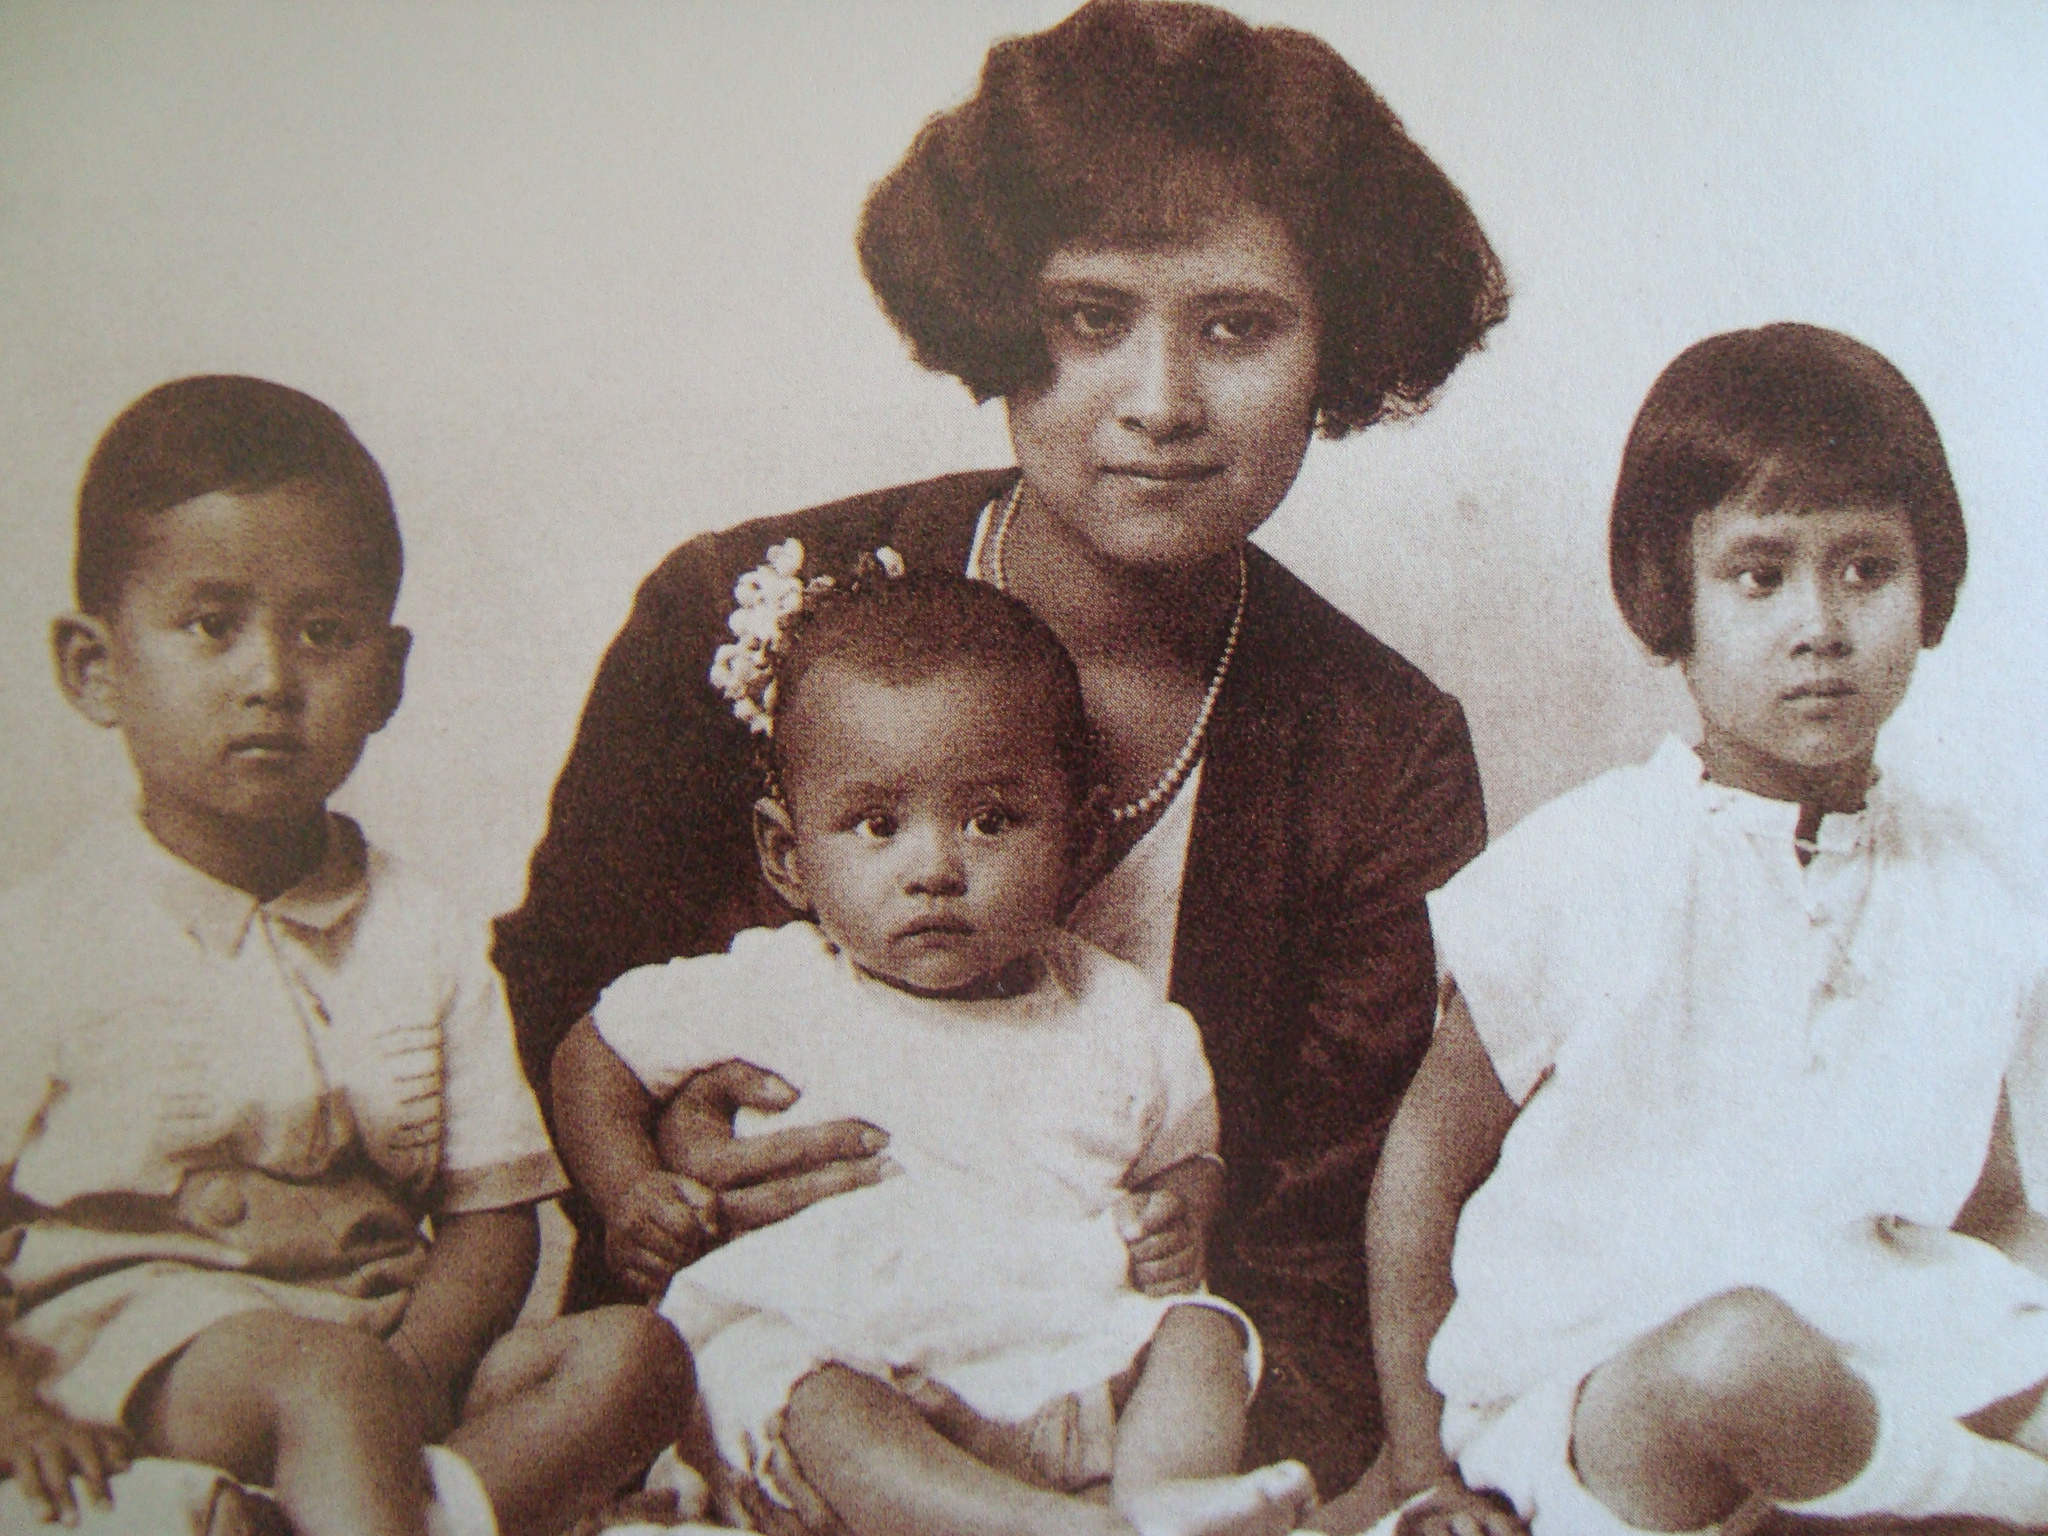 Bhumibol (centre) with his mother and siblings Ananda Mahidol (left) and Galyani Vadhana (right). 